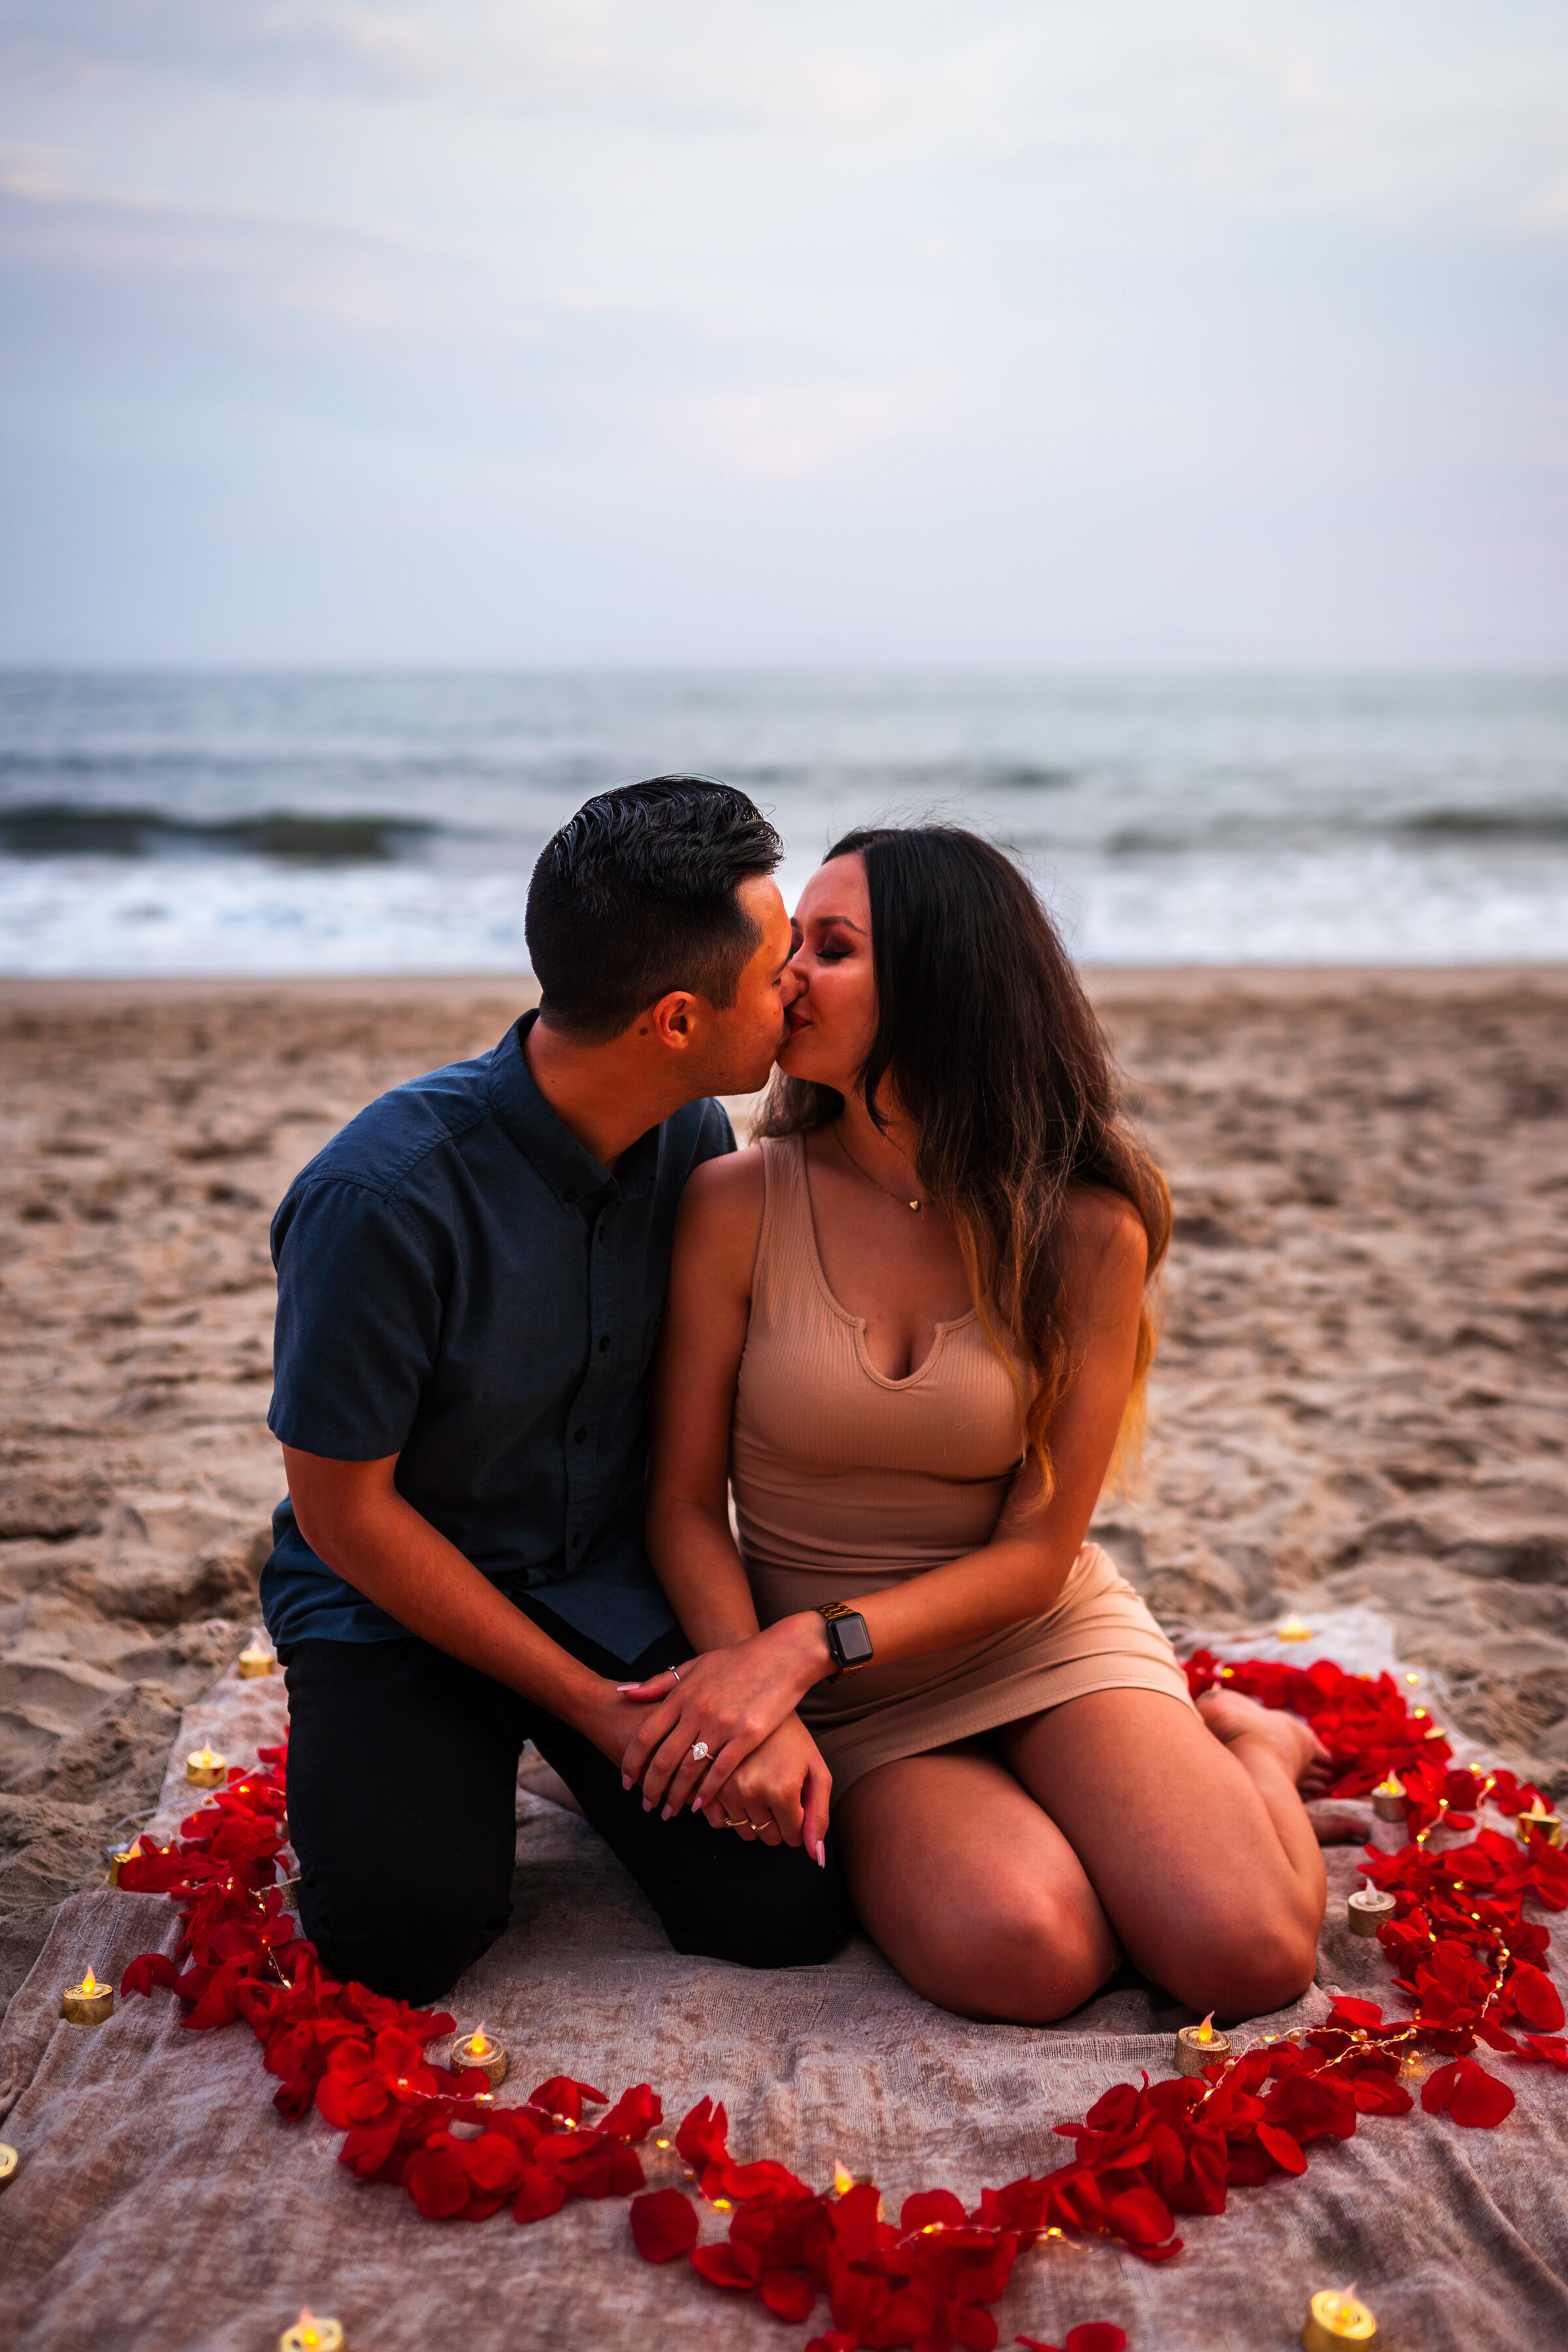 A couple sitting on the beach inside a heart made of rose petals